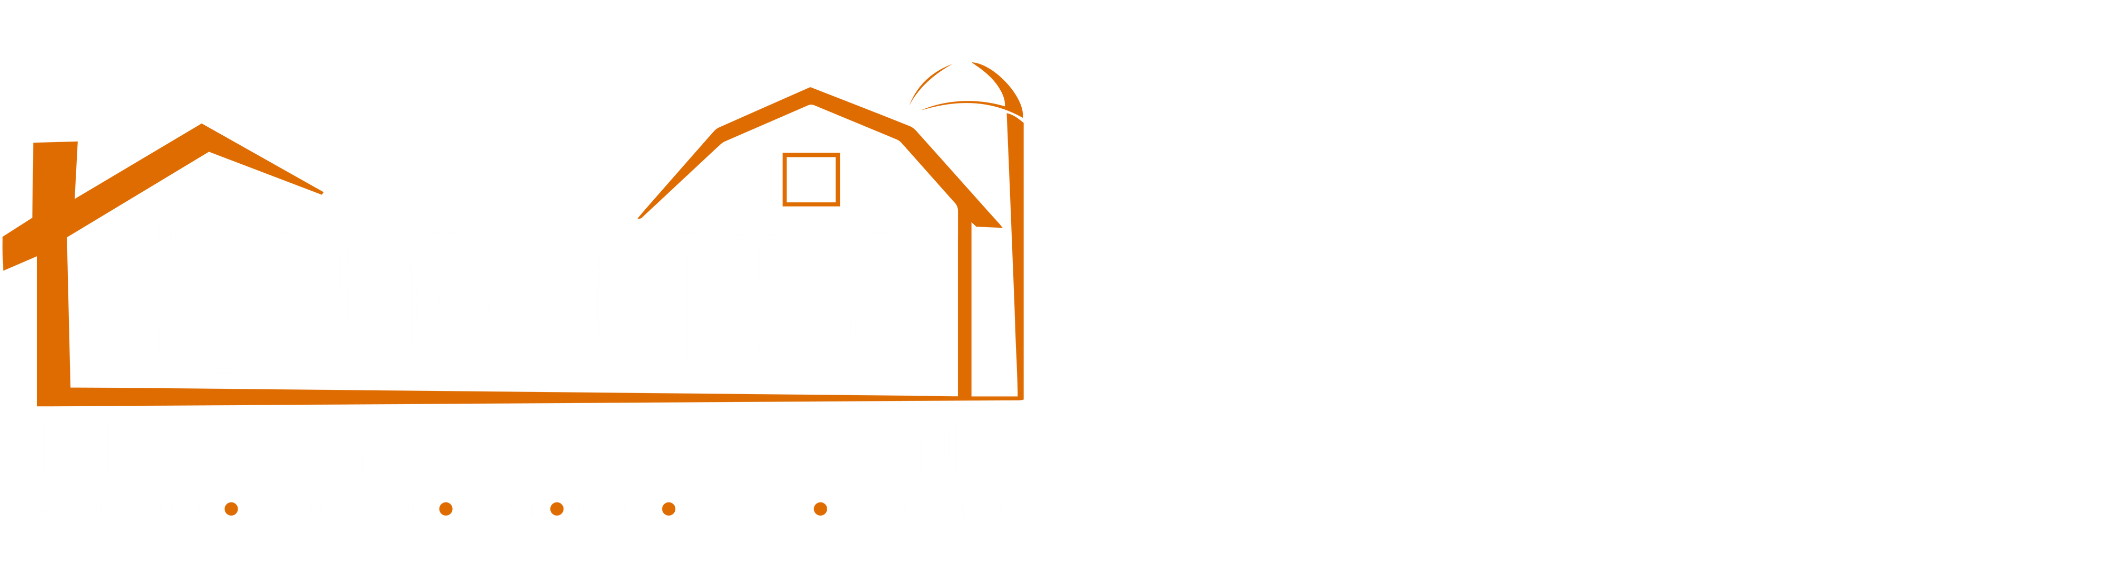 Integrity Realty & Auctions